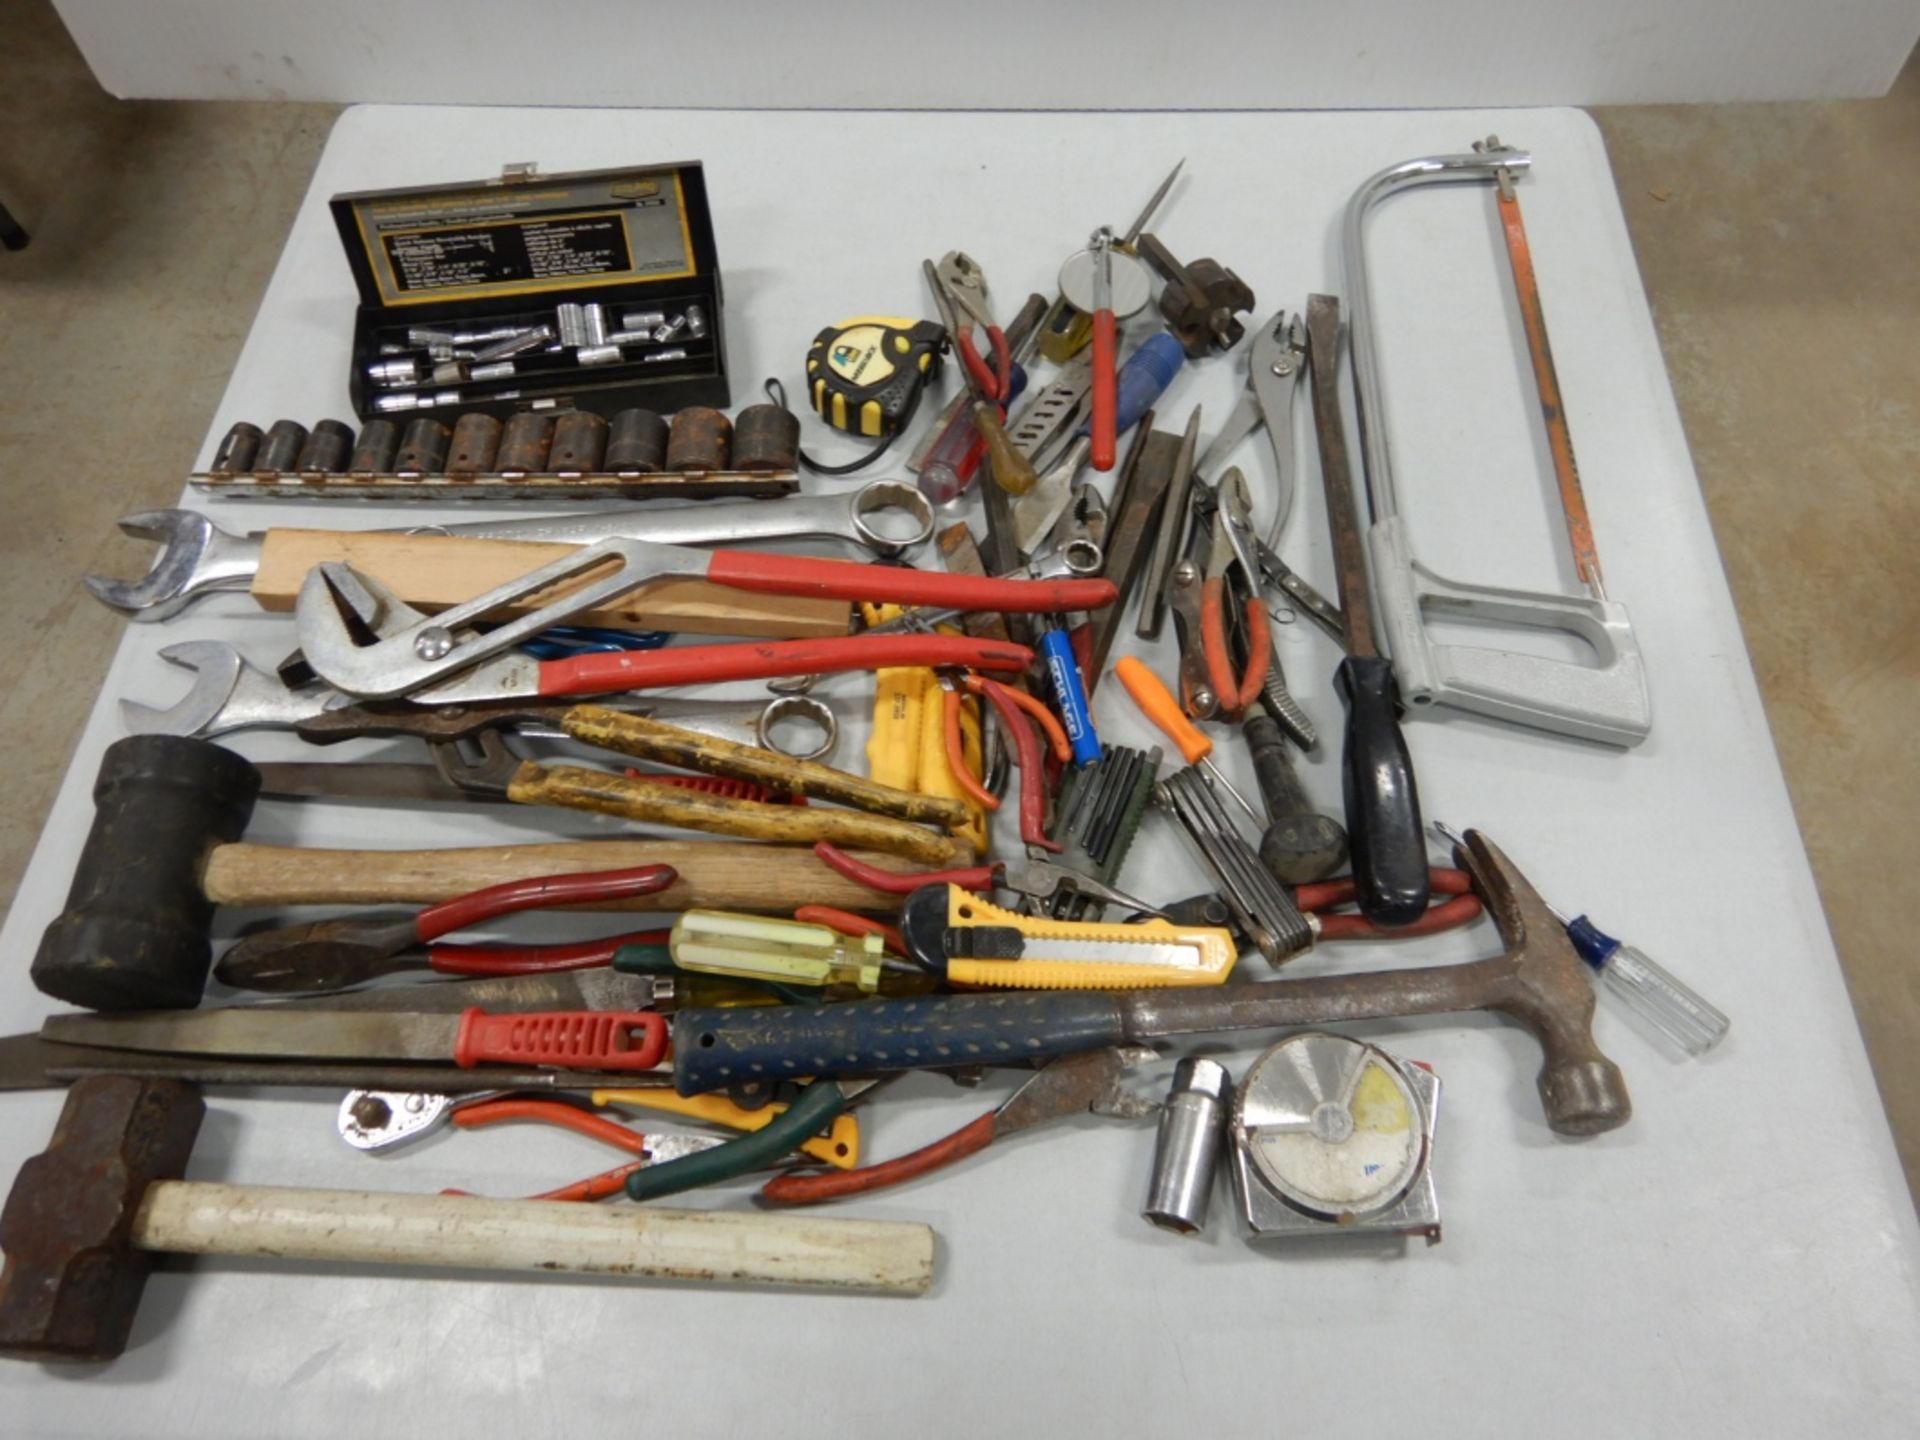 L/O ASSORTED HANDTOOLS, COMBINATION WRENCHES, SOCKETS, CAULKING GUNS, CHISELS, PLIERS, ETC. - Image 7 of 7